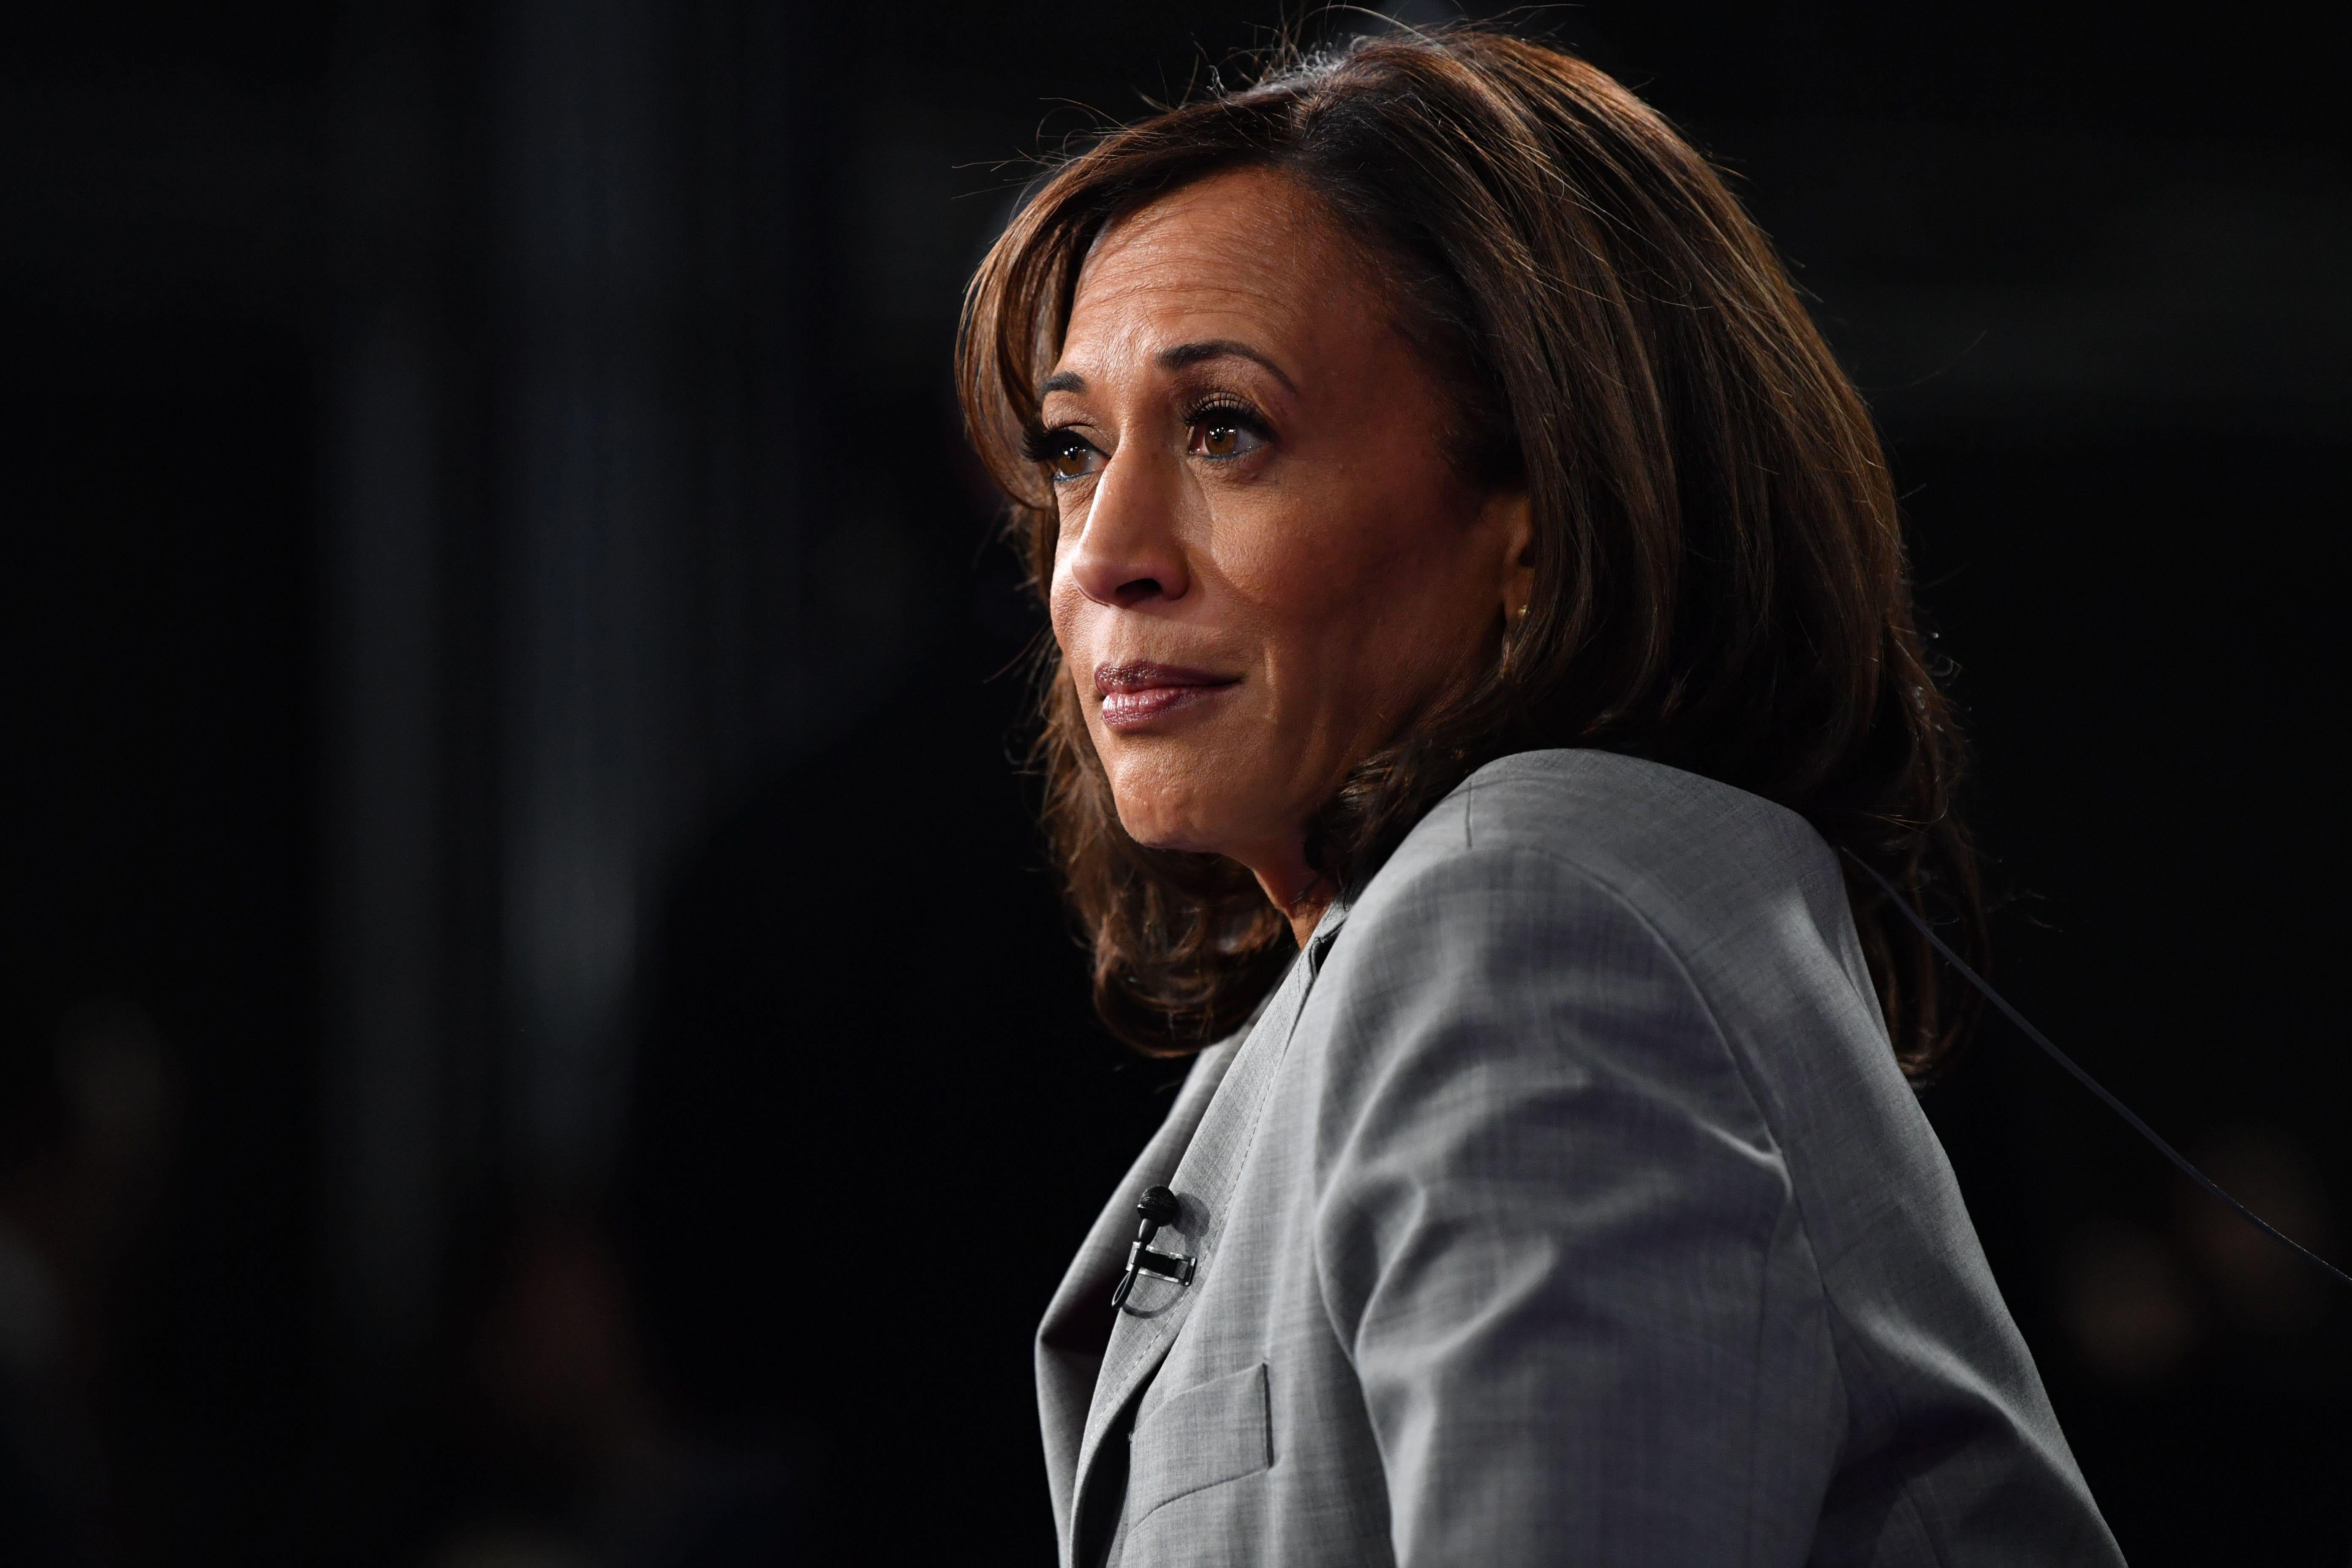 Democratic presidential hopeful California Senator Kamala Harris speaks to the press in the Spin Room after participating in the fifth Democratic primary debate of the 2020 presidential campaign season in Atlanta, Georgia on November 20, 2019.